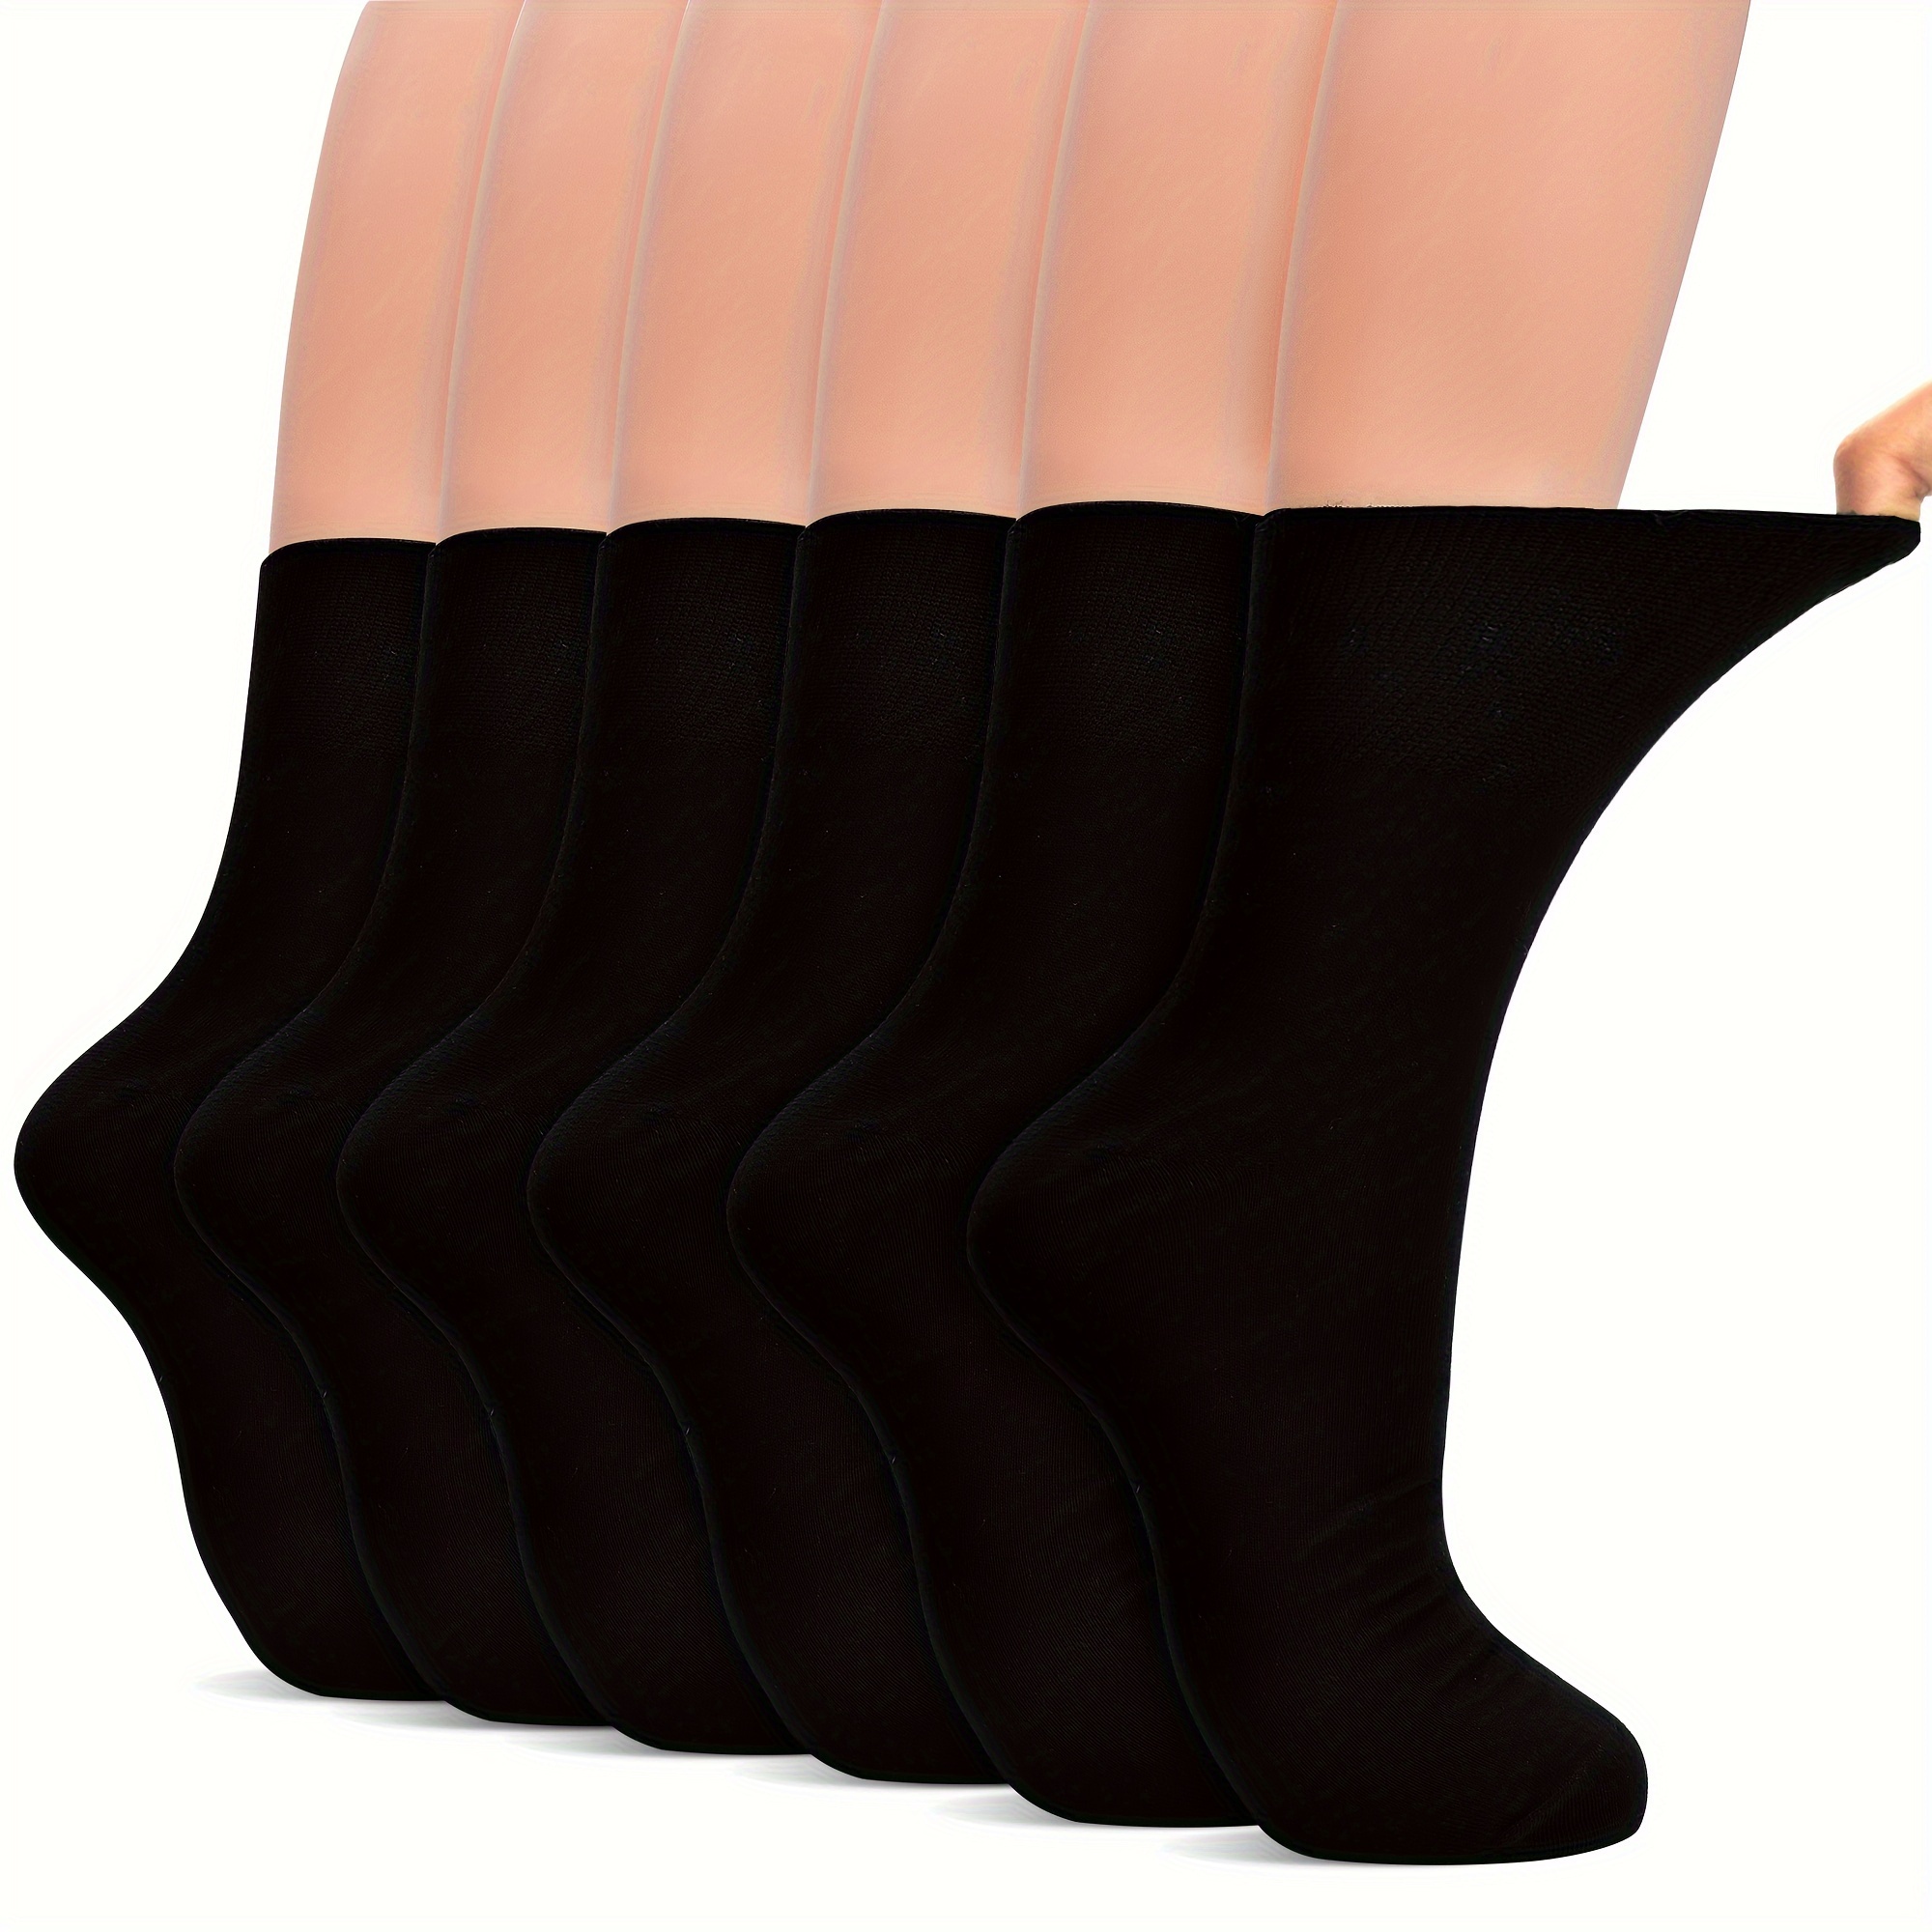 

6 Pairs Of Diabetic Socks, Loose And Elastic For Diabetic Patients And Pregnant Women, Moisture Absorption And Perspiration, Can Prevent Foot Swelling And Pain